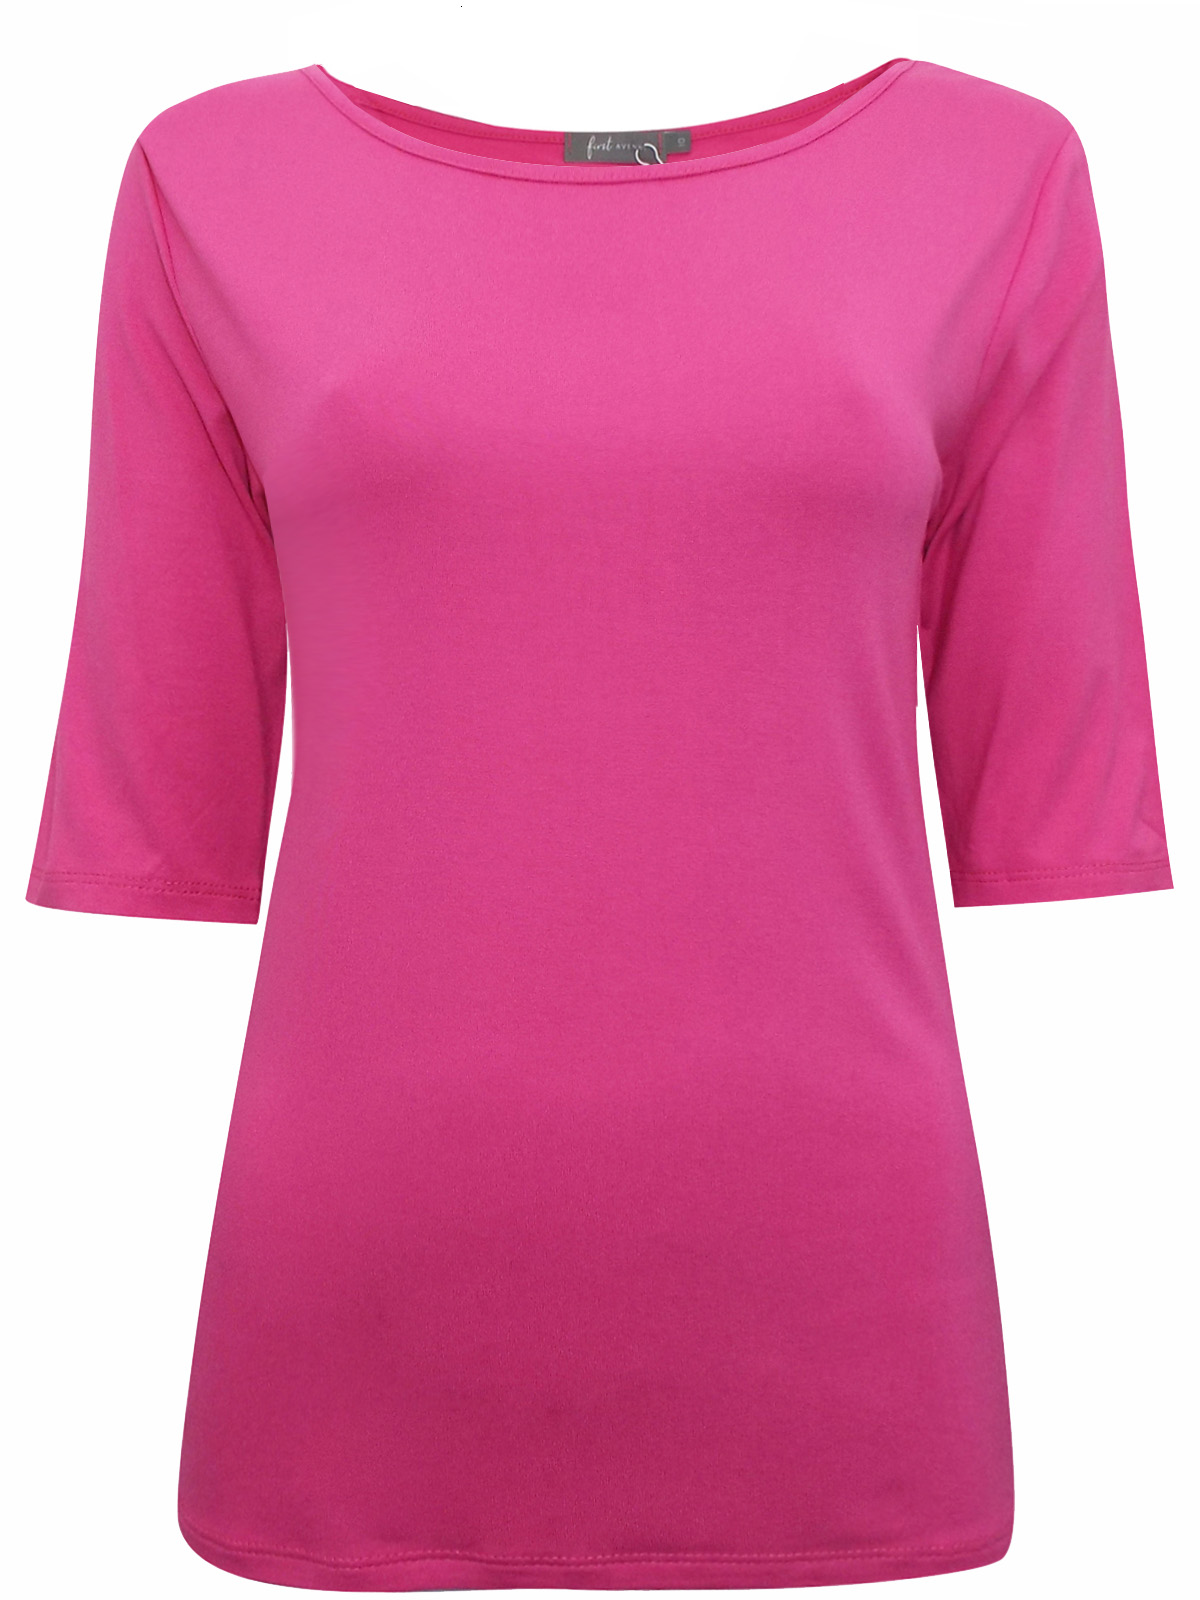 First Avenue PINK Half Sleeve Jersey Top - Size 10 to 20